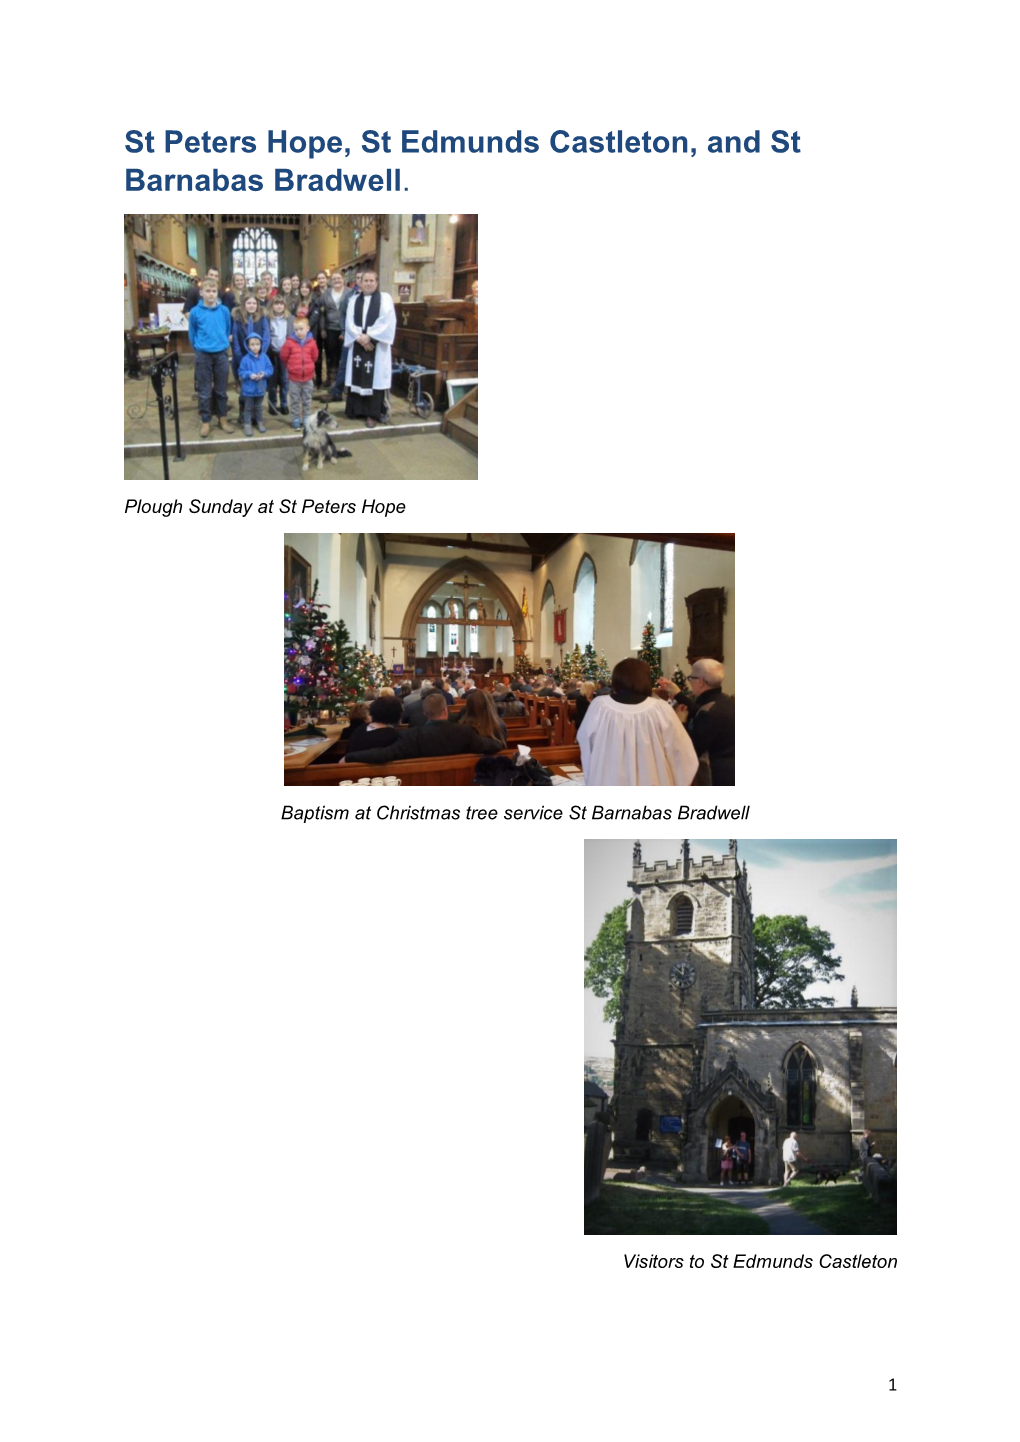 St Peters Hope, St Edmunds Castleton, and St Barnabas Bradwell